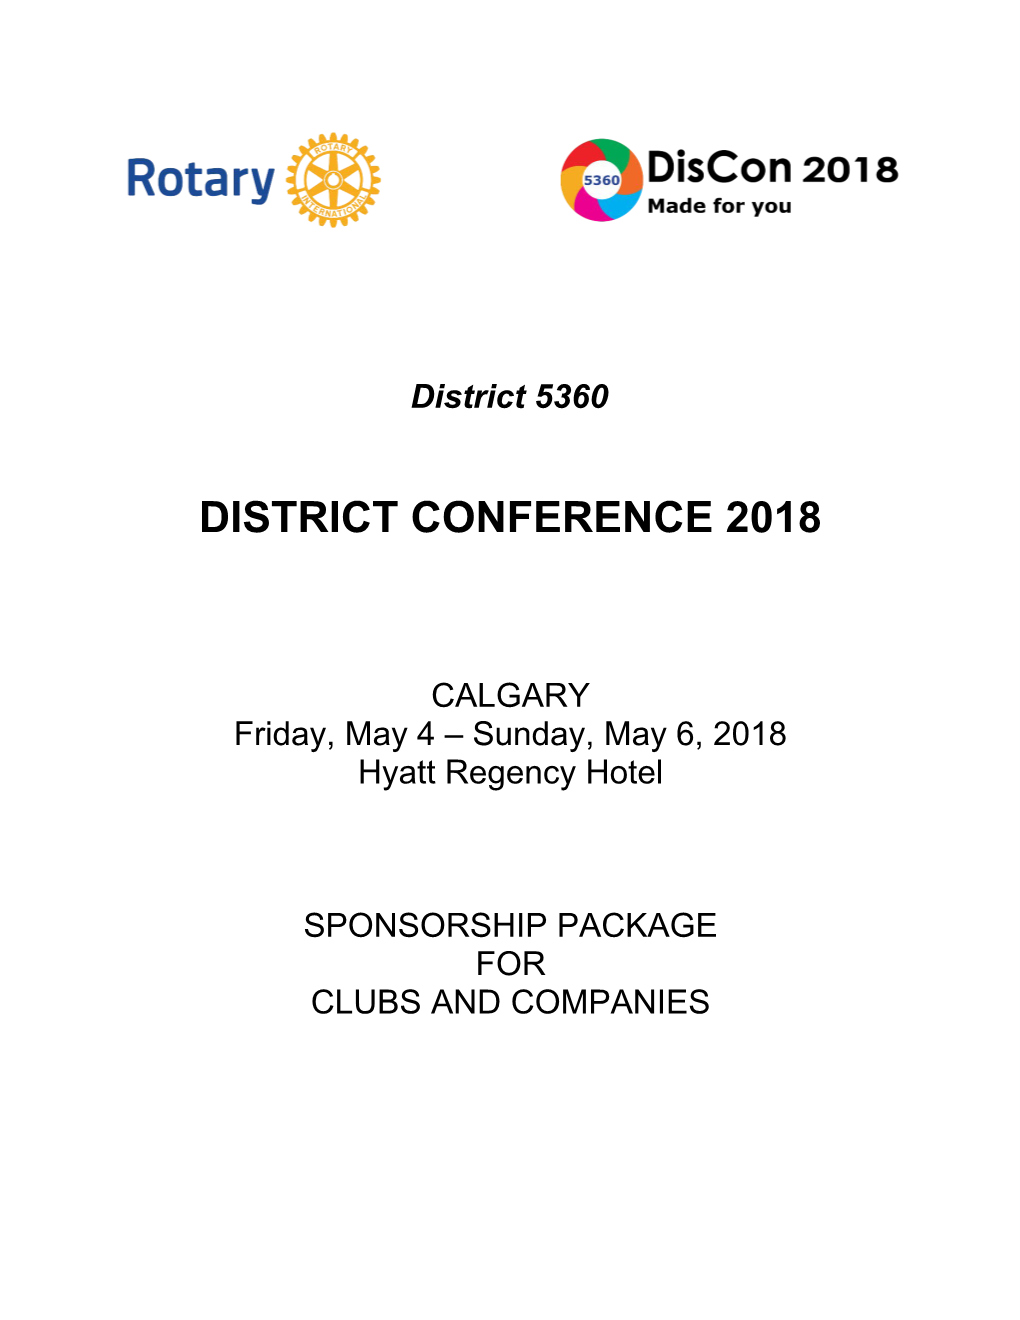 District Conference 2018